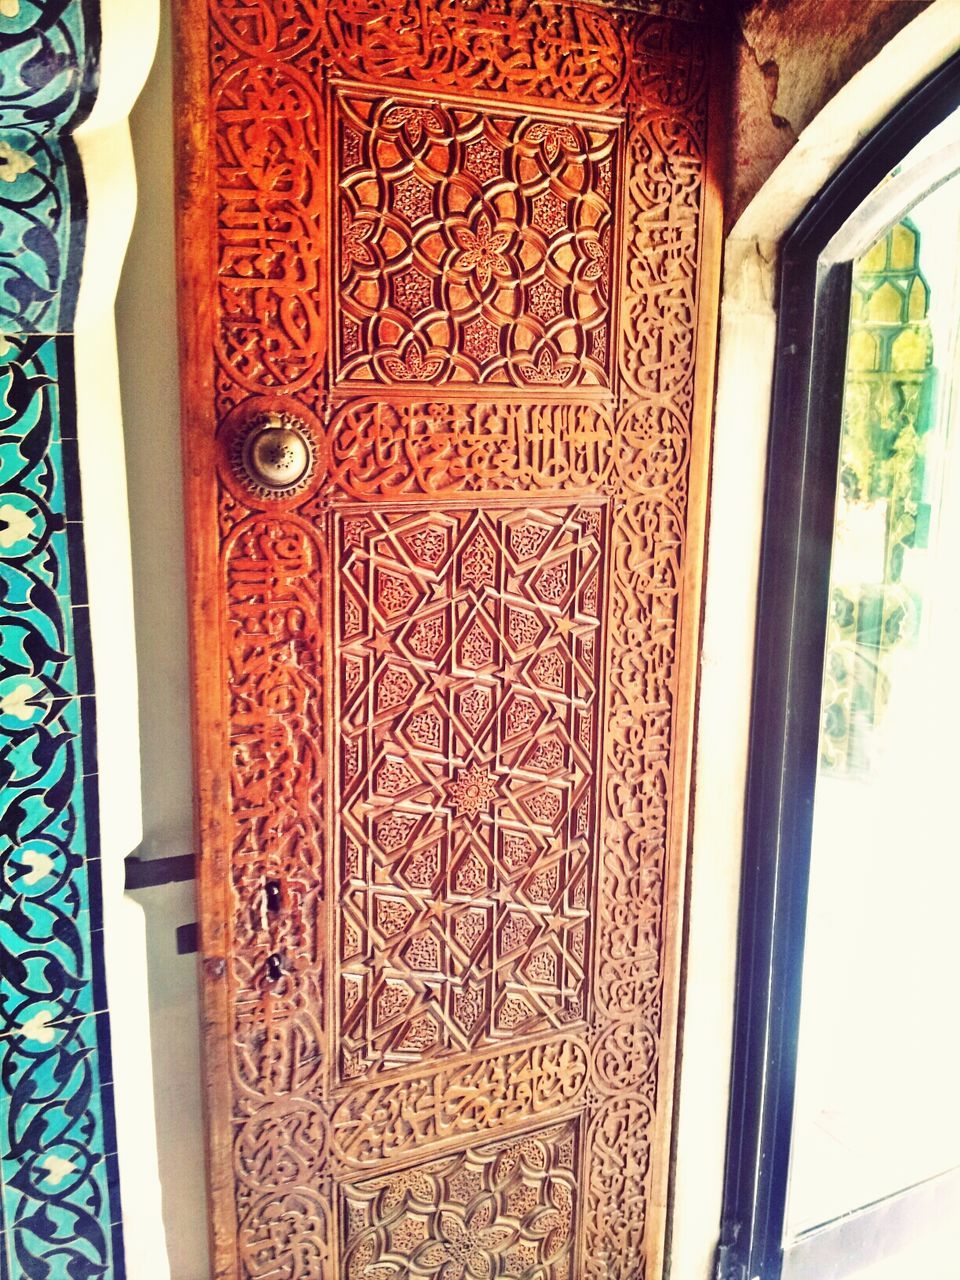 indoors, design, art and craft, pattern, ornate, art, creativity, close-up, door, wood - material, built structure, metal, architecture, wall - building feature, no people, floral pattern, closed, part of, religion, carving - craft product